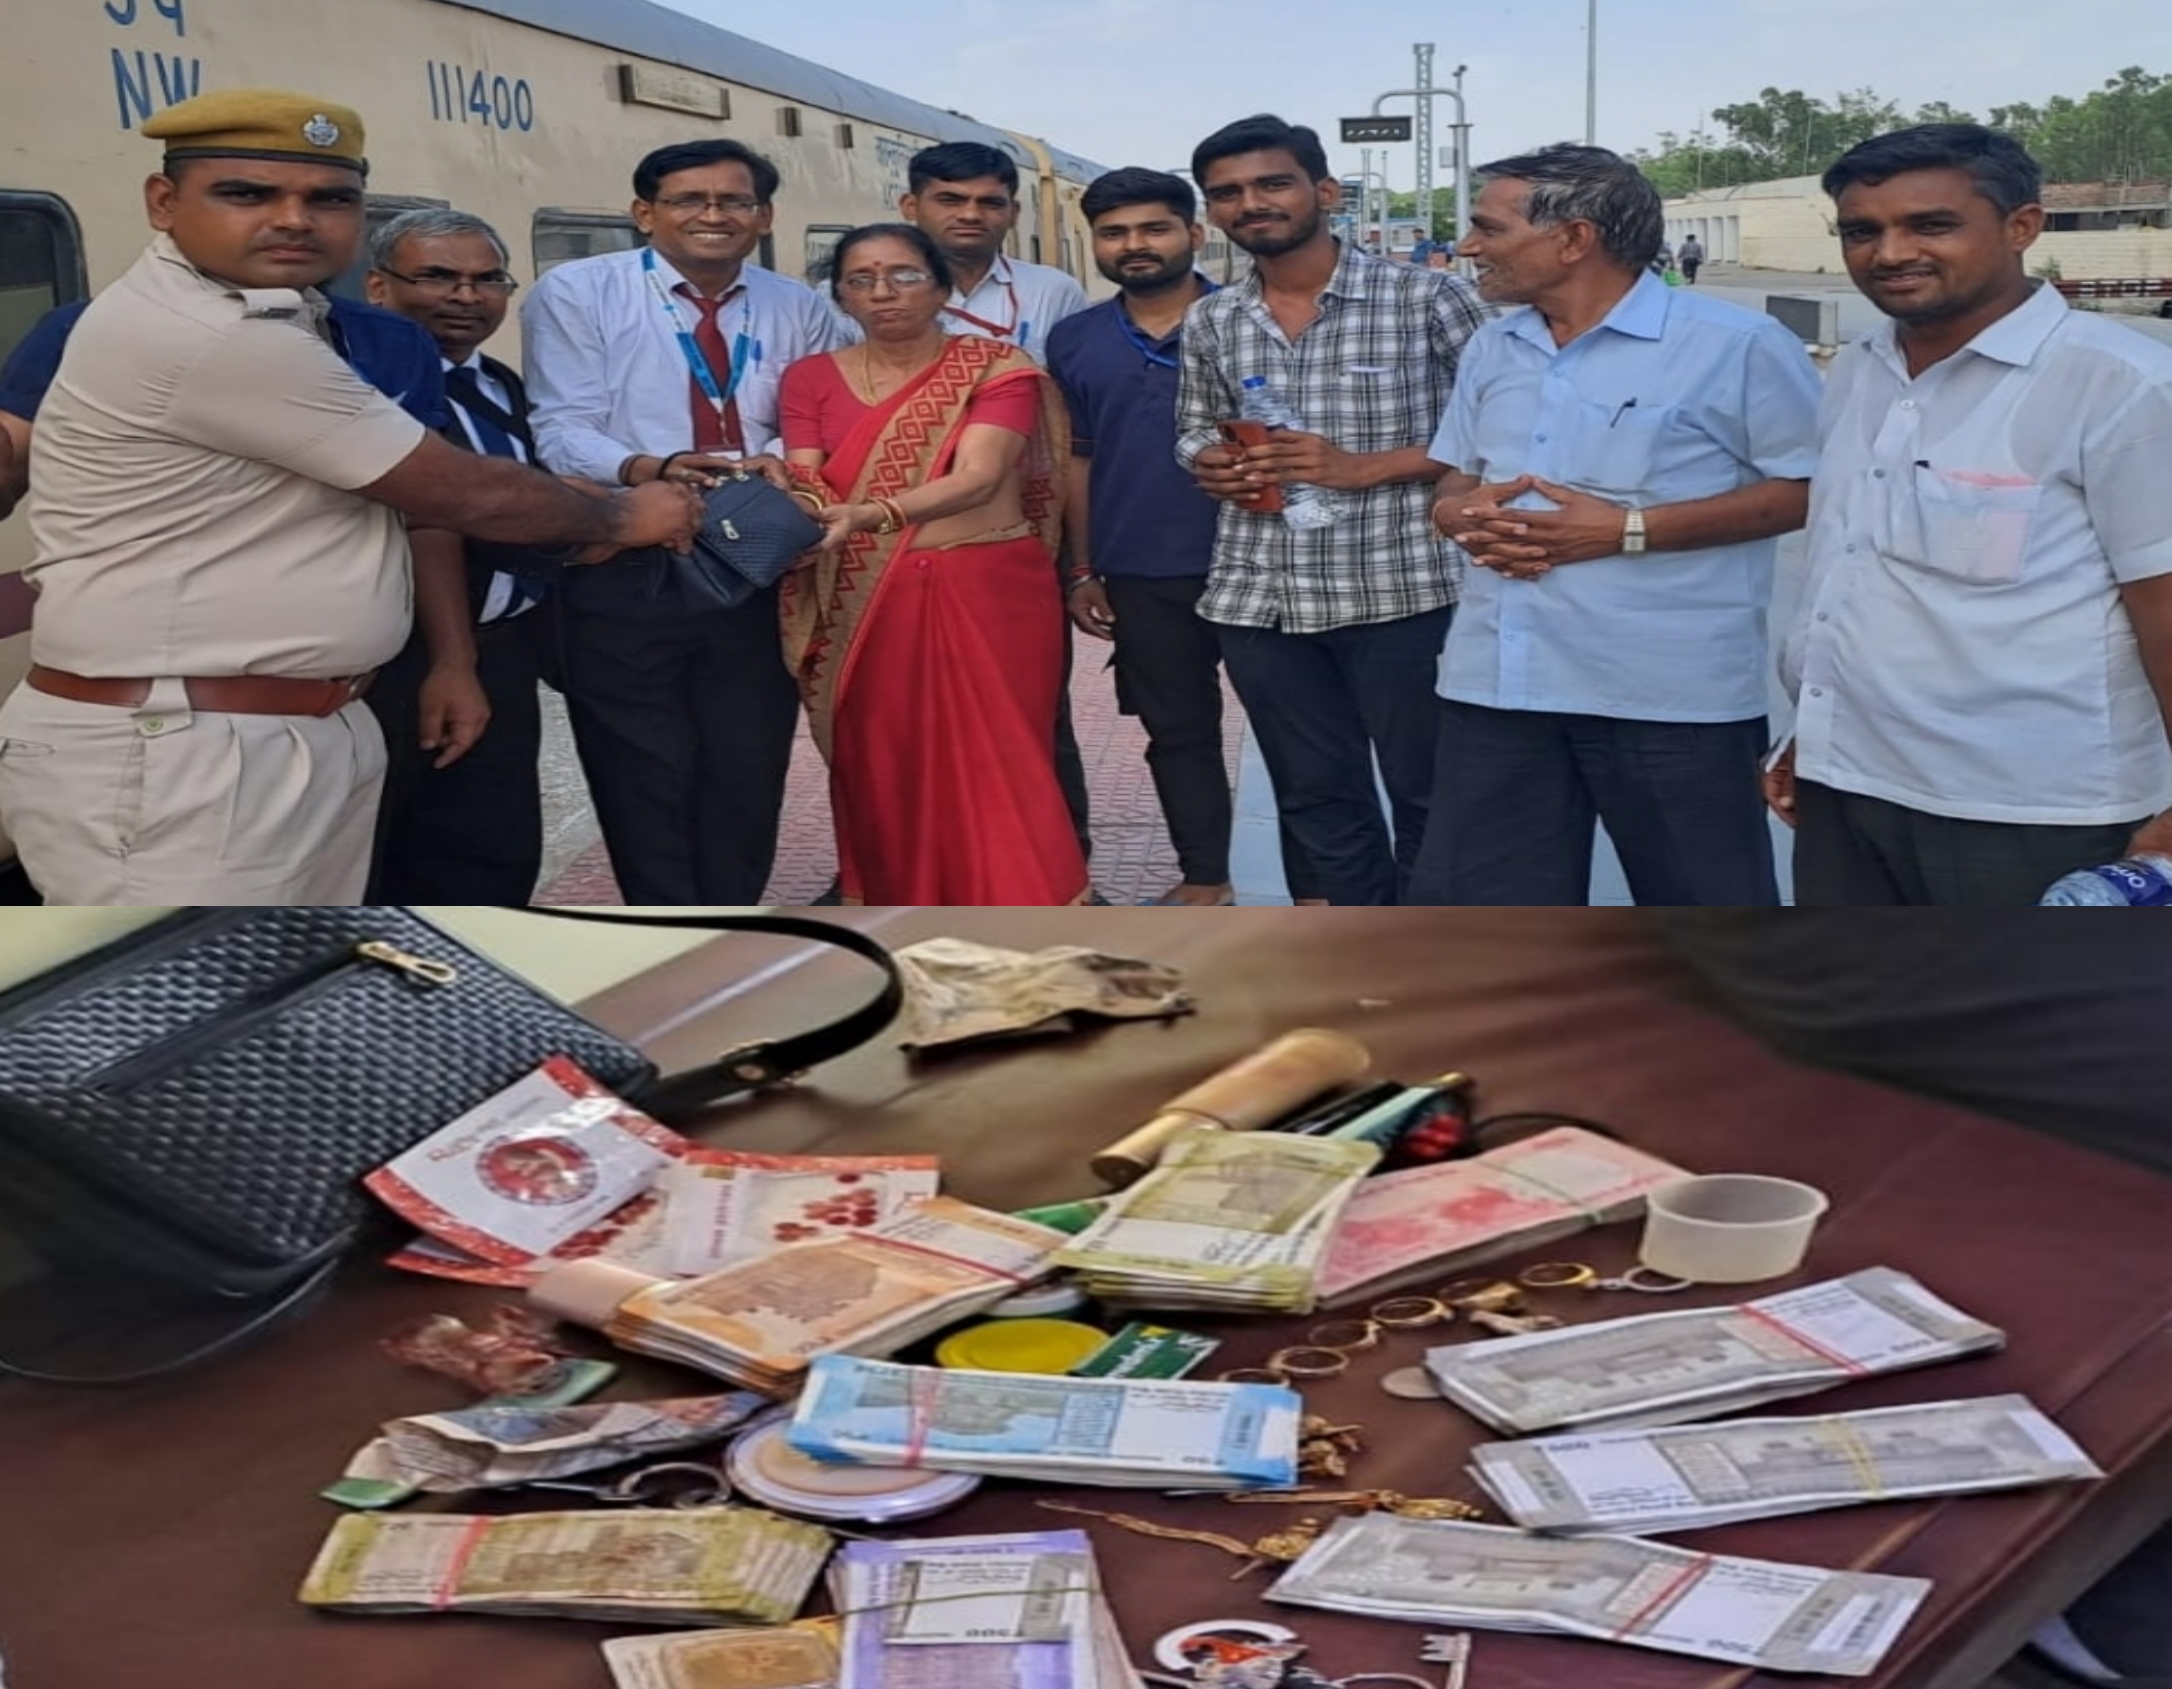 railway-returned-purse-full-of-jewelry-and-cash-to-woman-passenger